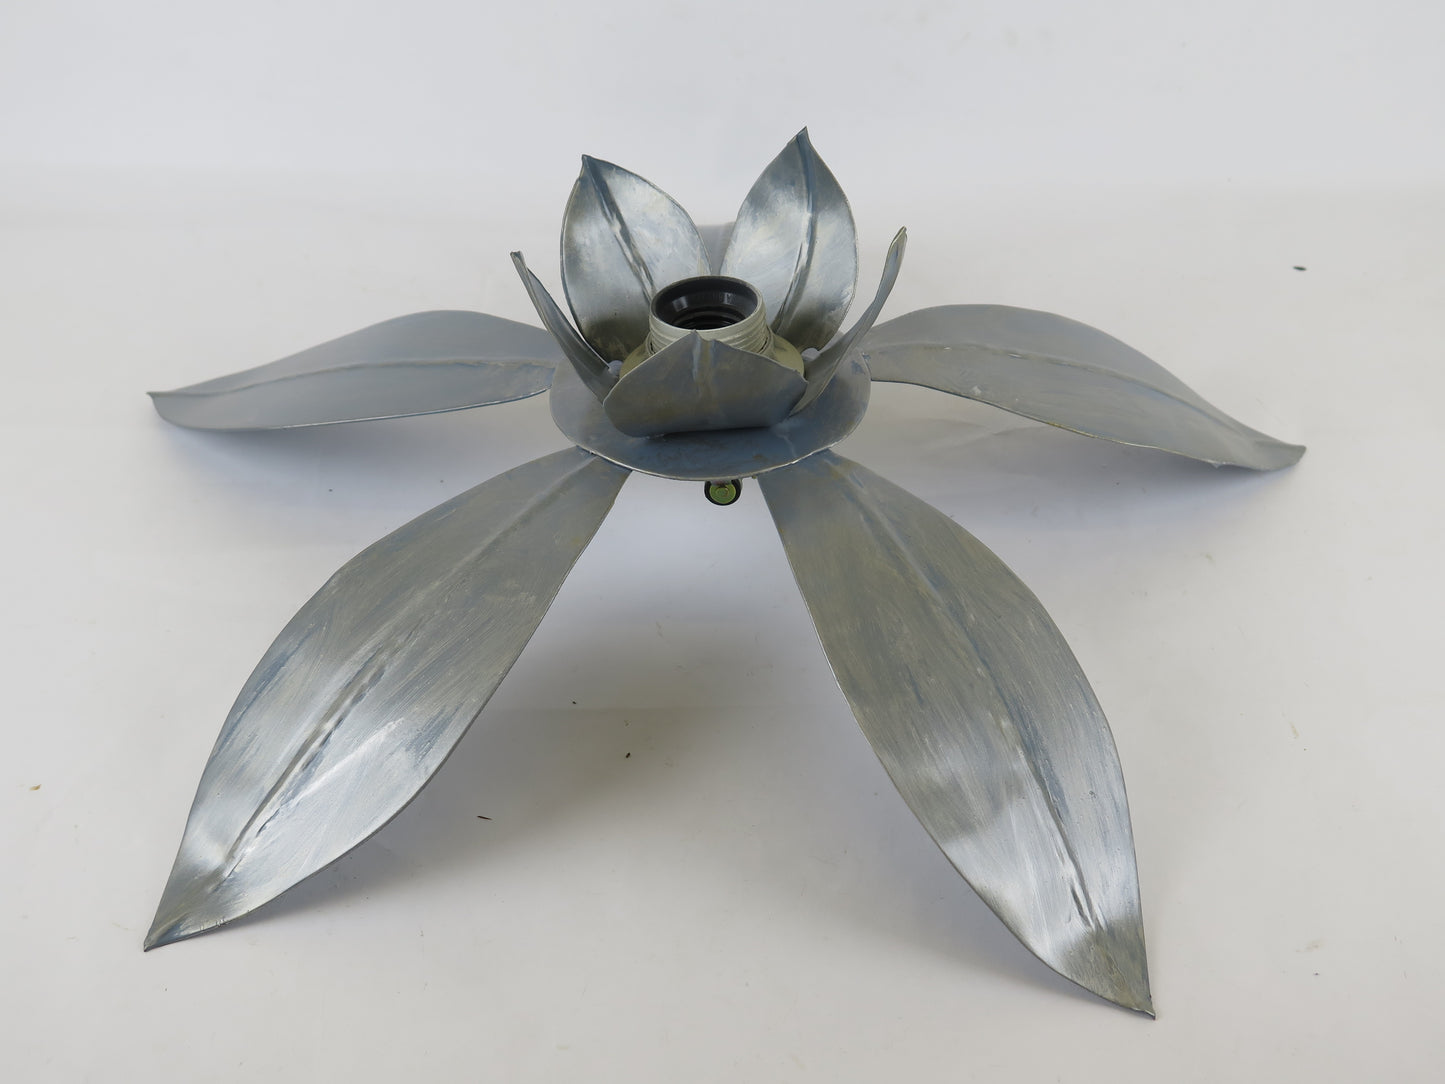 VINTAGE WALL LAMP DESIGN CHANDELIER CEILING LIGHT WROUGHT IRON FLOWER SHAPE CH.S.1